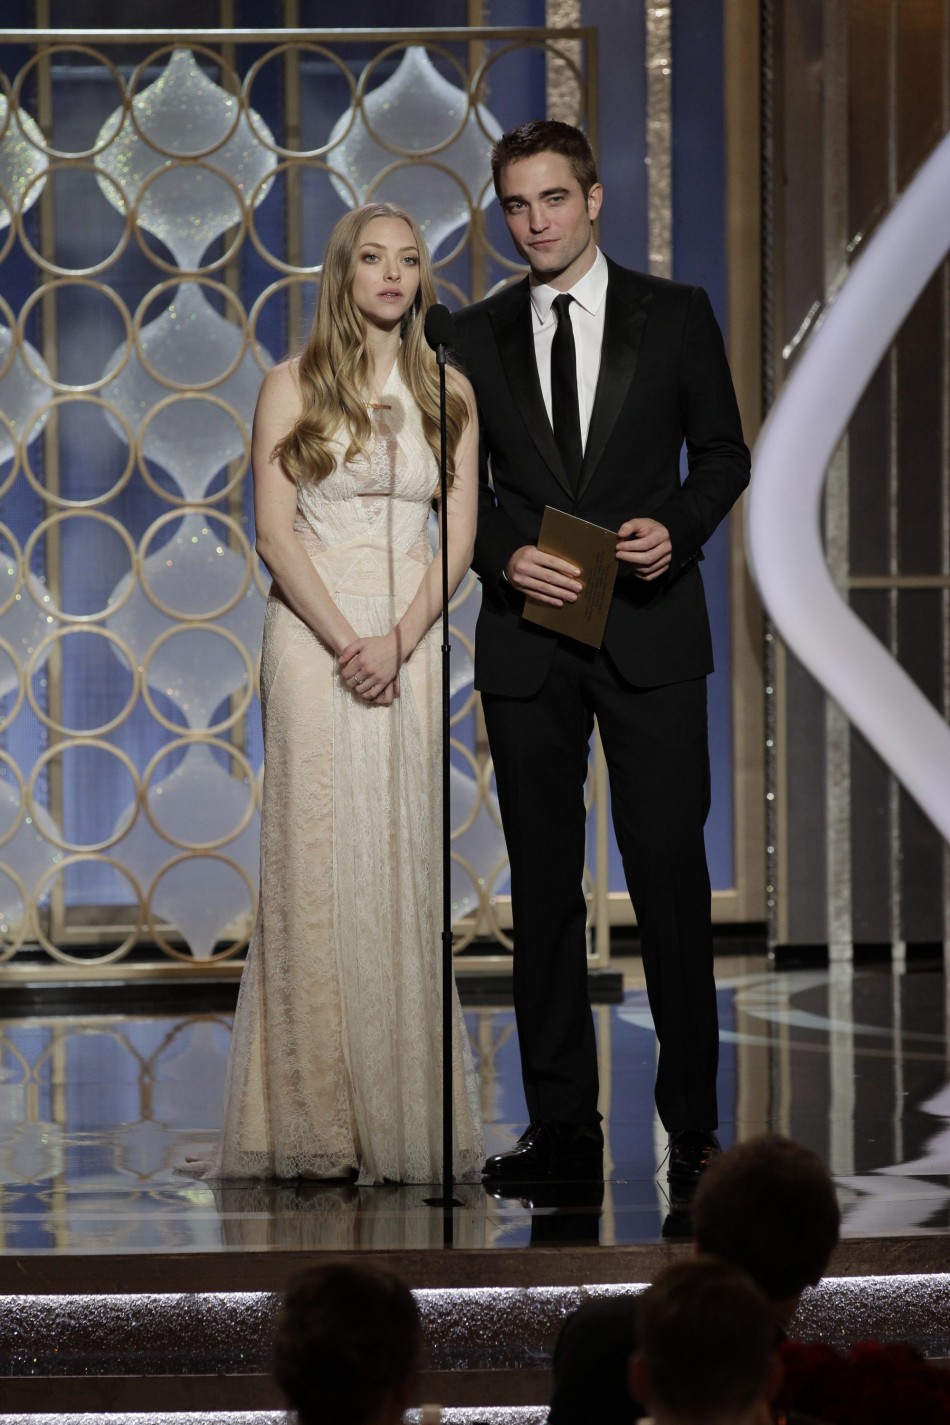 Presenters Amanda Seyfried and Robert Pattinson on stage at the Golden Globe Awards in Beverly Hills